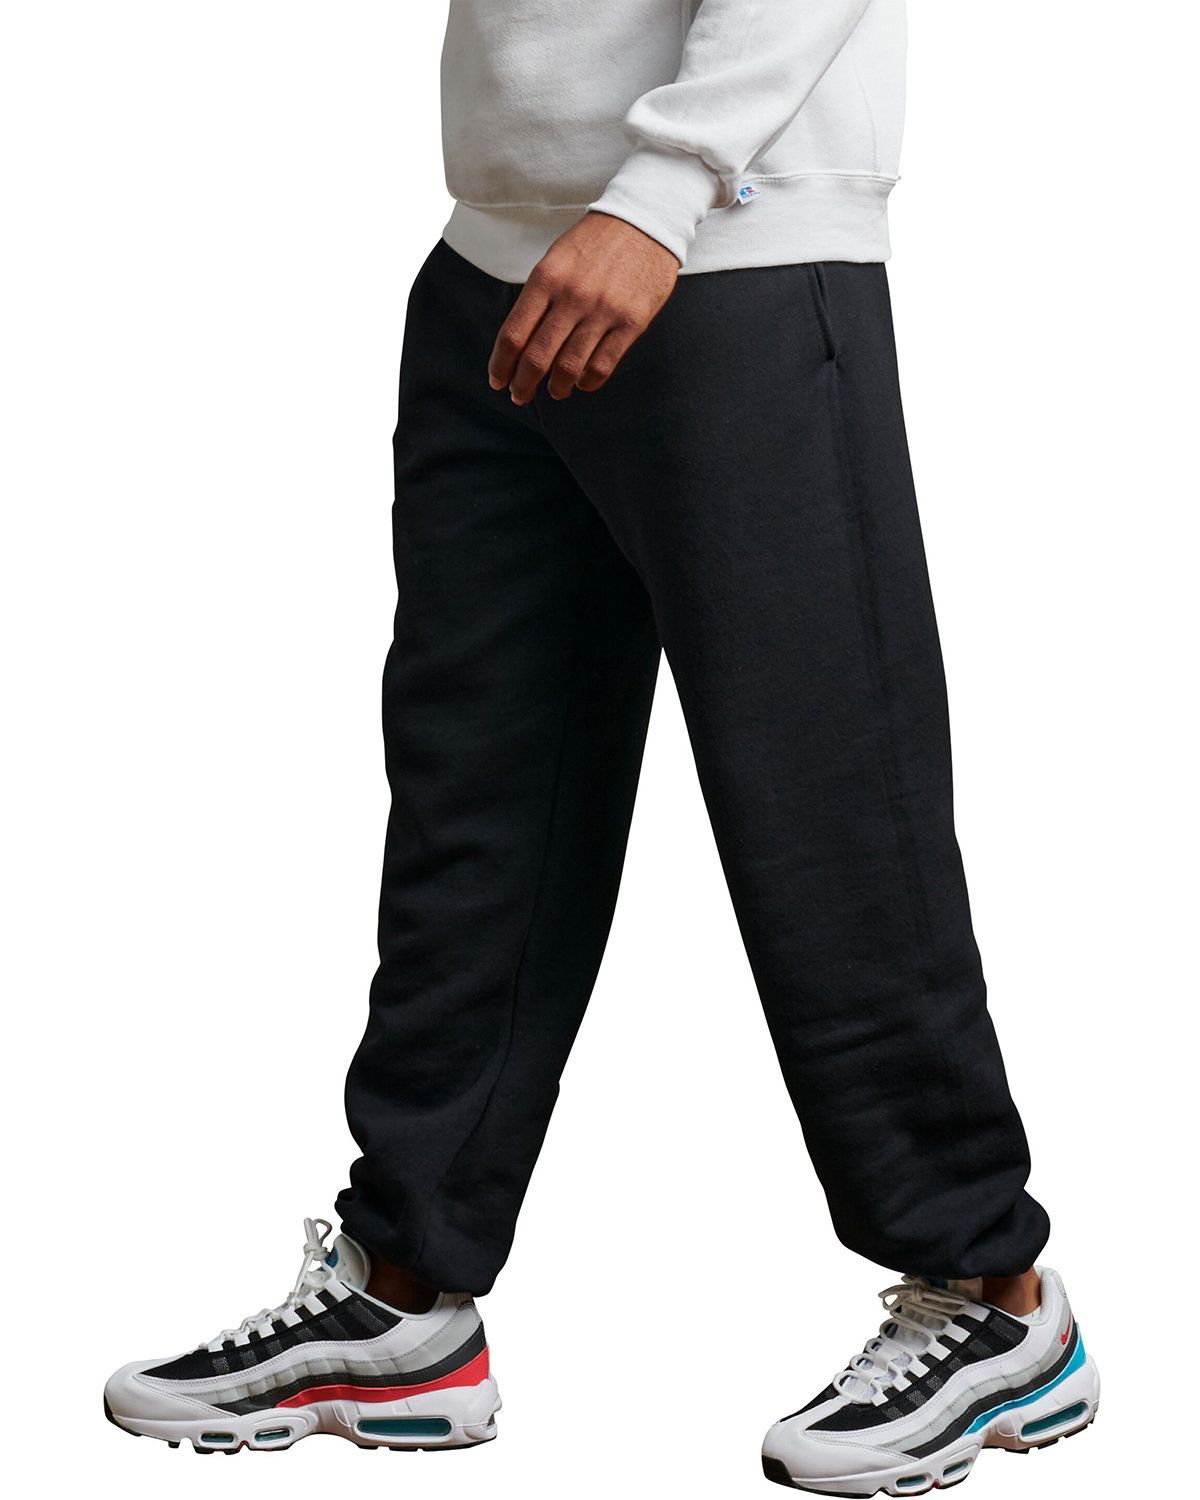 Russell Athletic 029HBM Men Closed-Bottom Sweatpants with Pockets